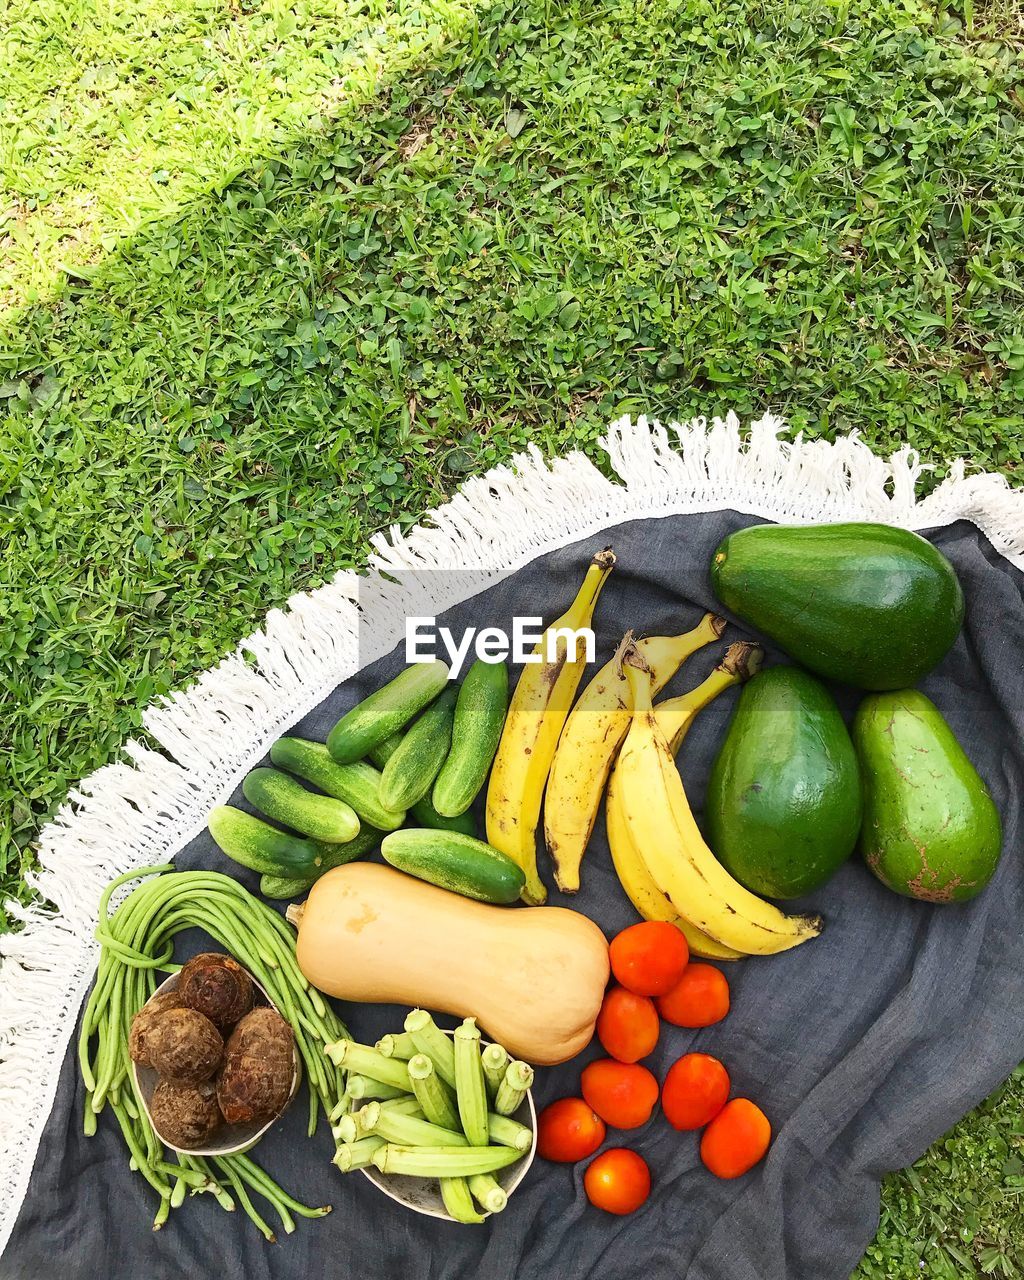 HIGH ANGLE VIEW OF VEGETABLES IN BASKET ON GRASS